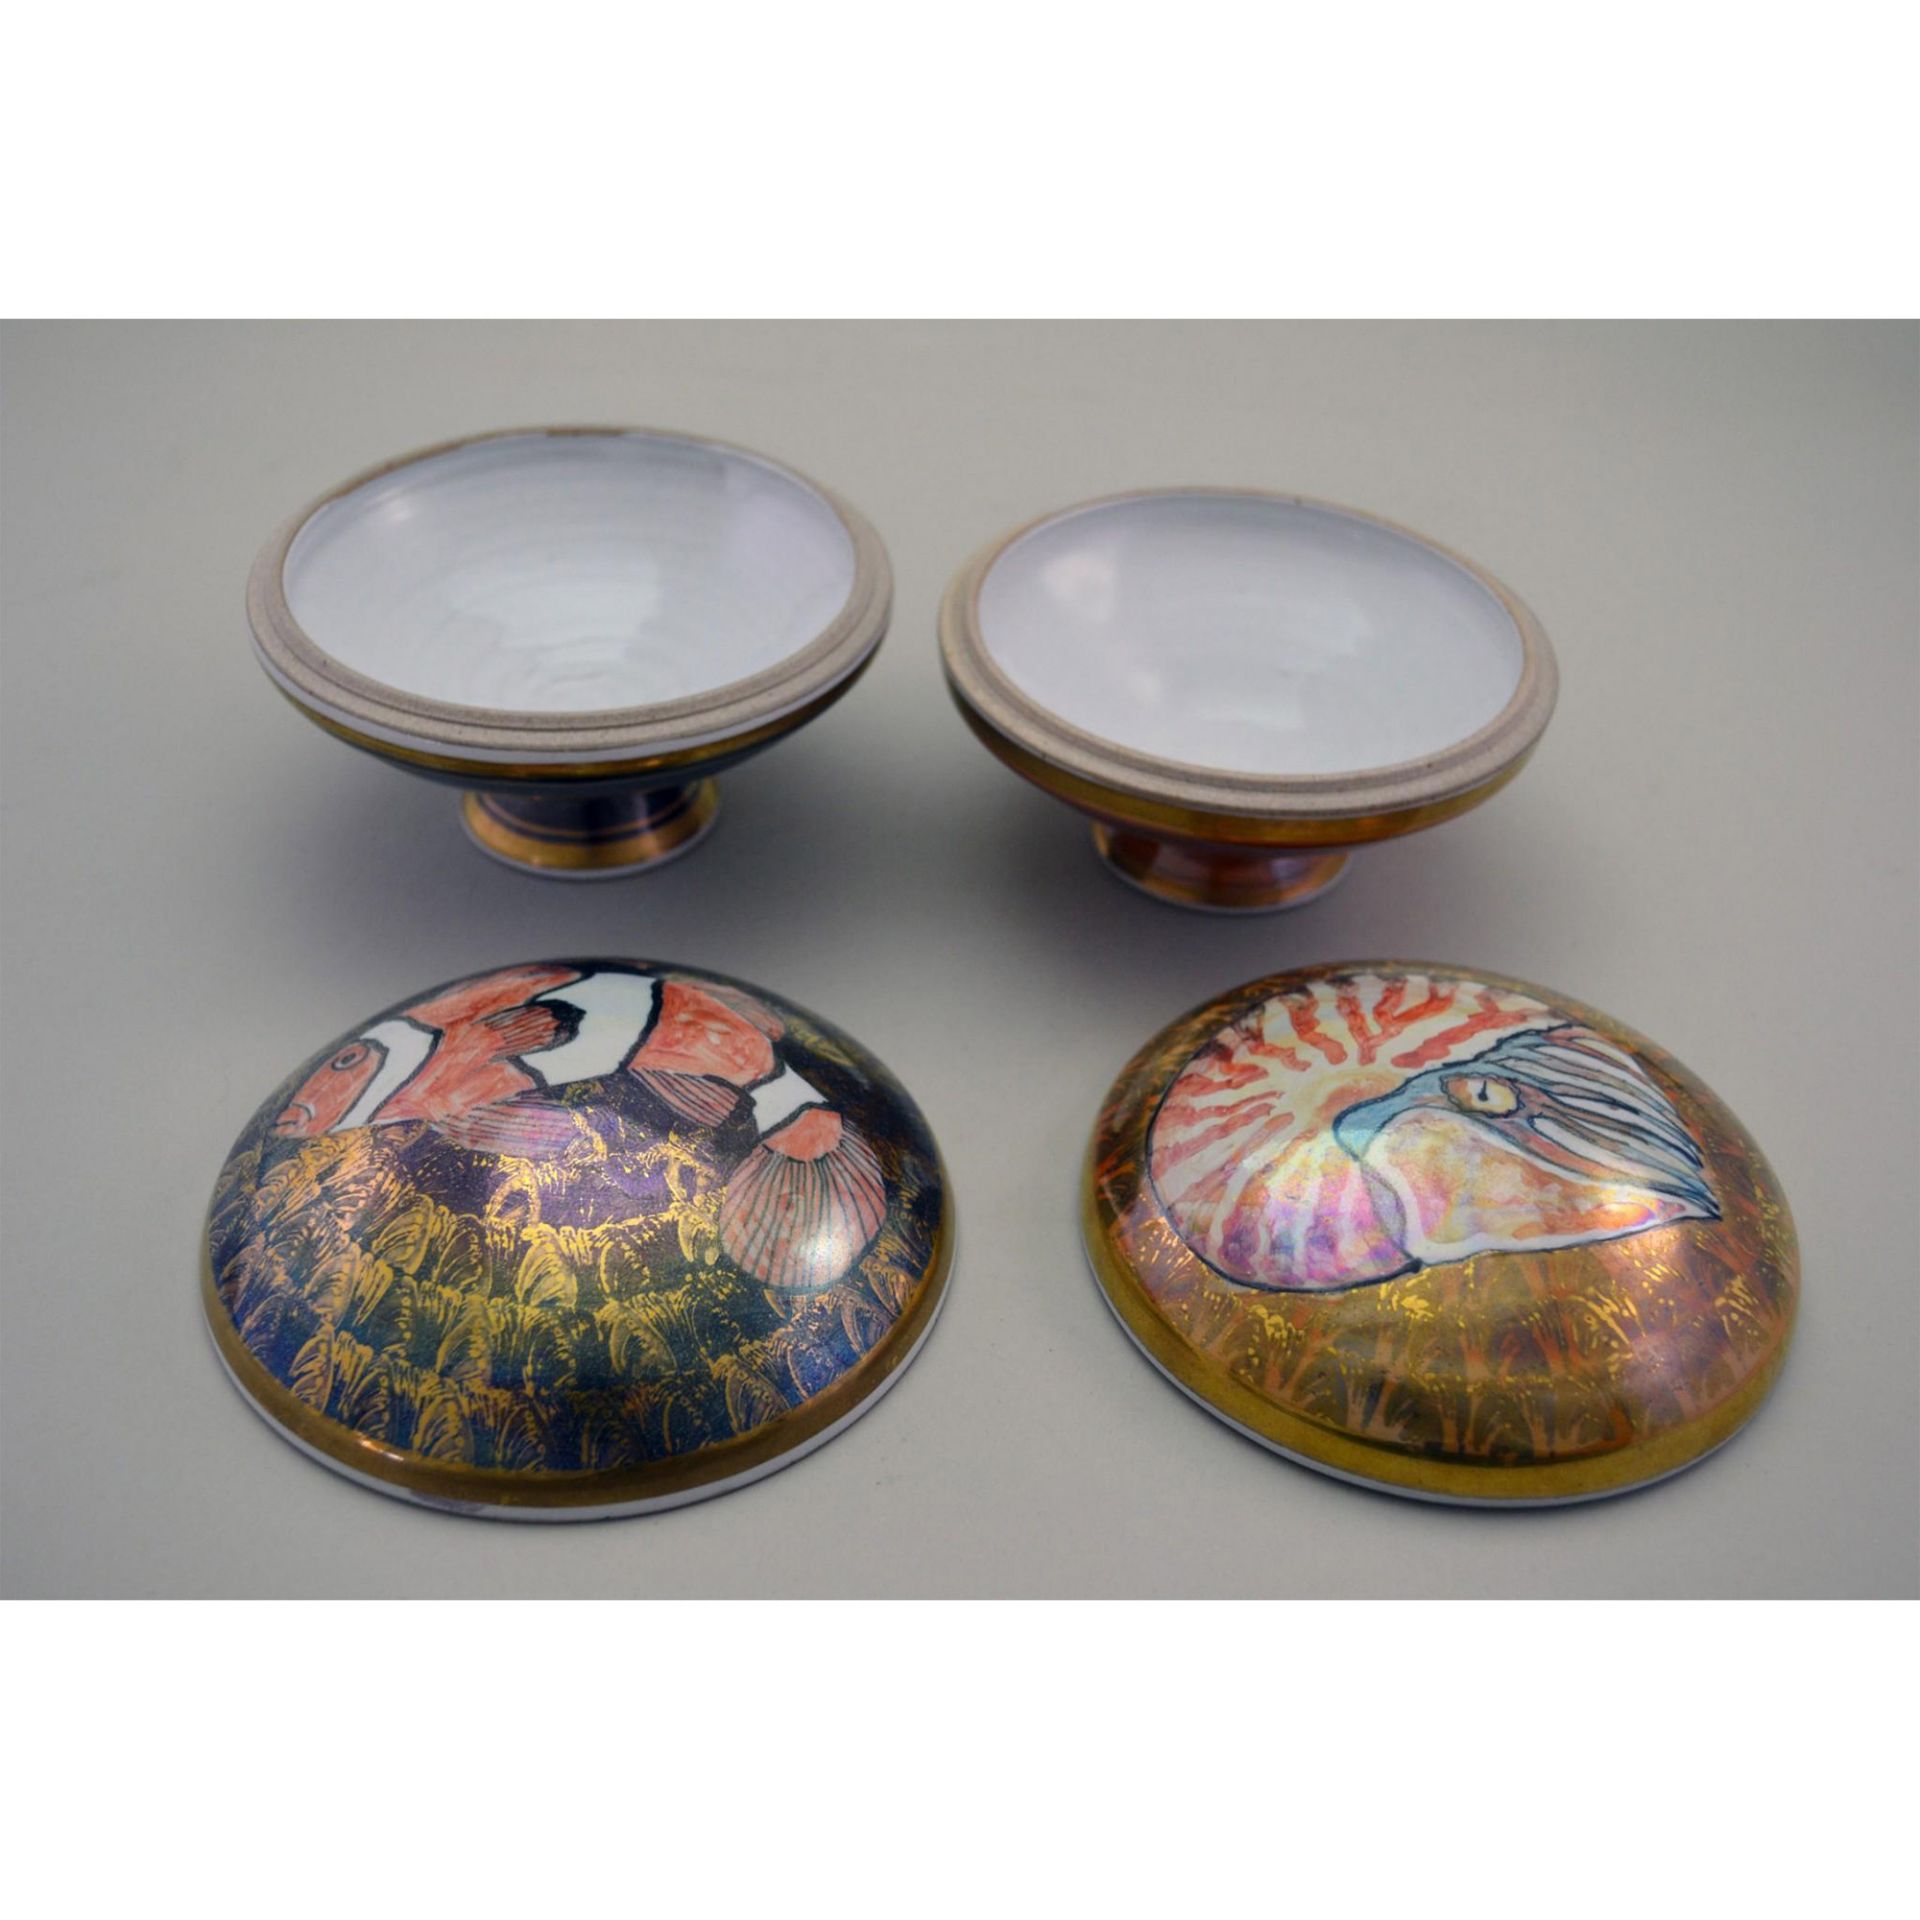 Hawkins Pottery Nautical Shell And Tropical Clownfish Covered Trinket Boxes, 2 Pcs - Bild 7 aus 7